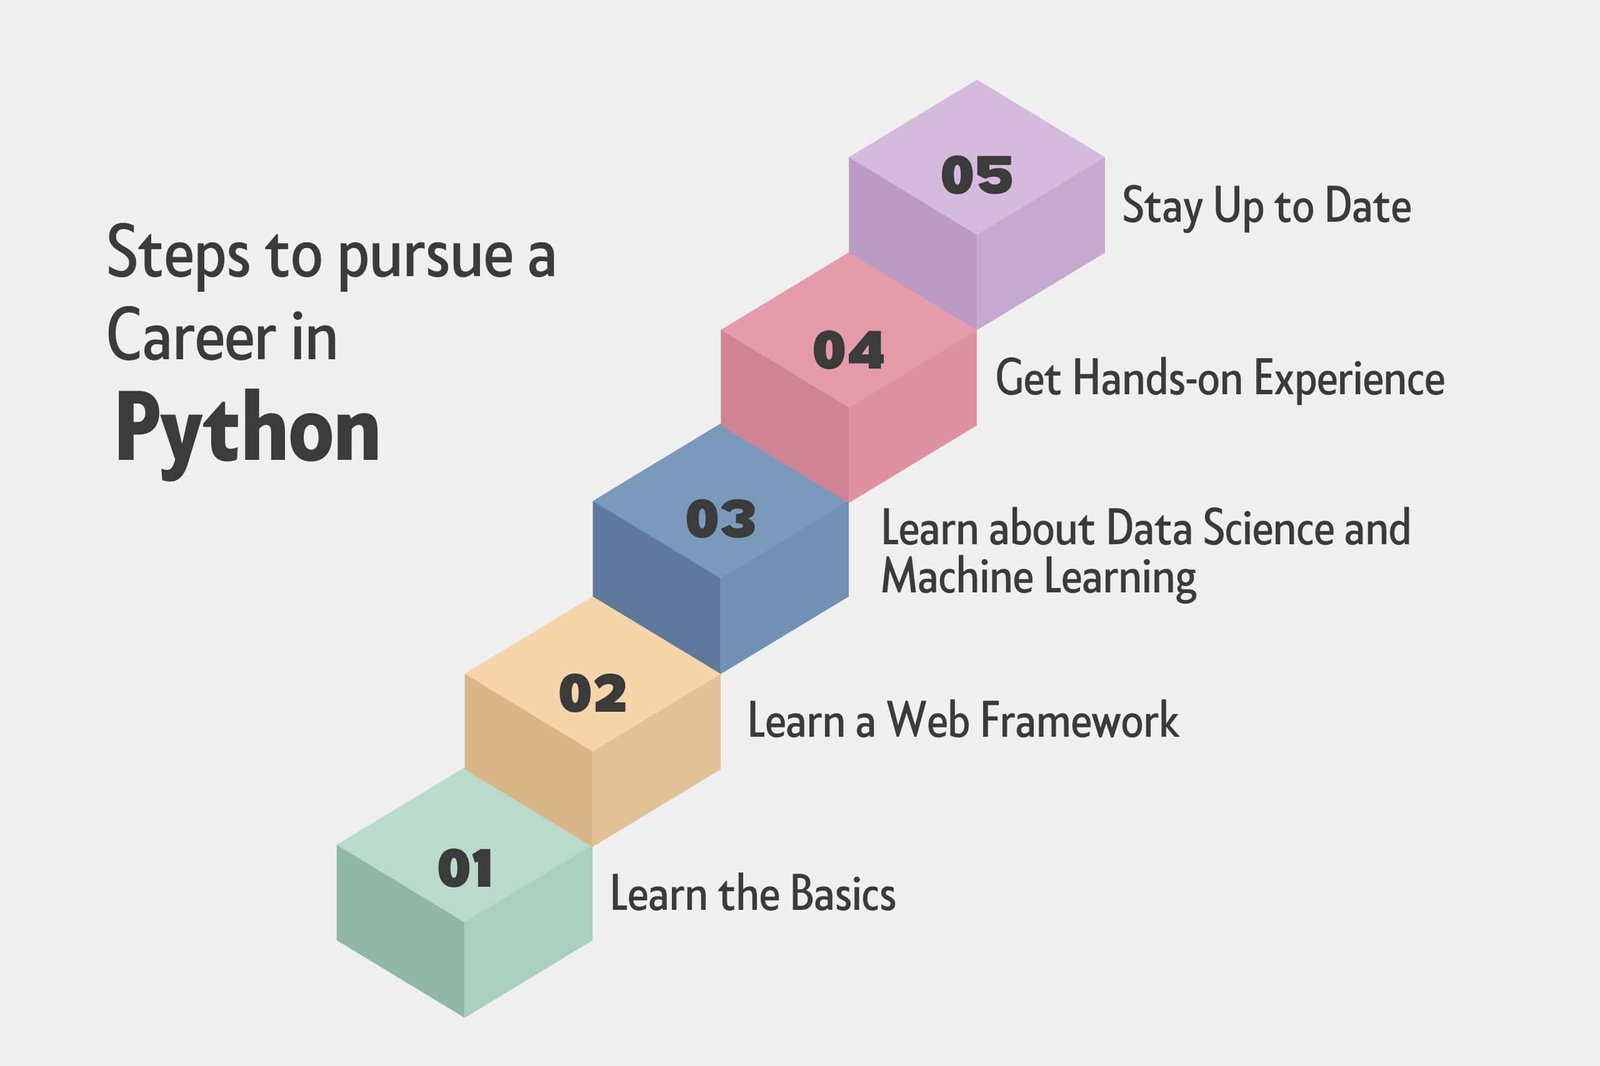 Steps to pursue a Career in Python